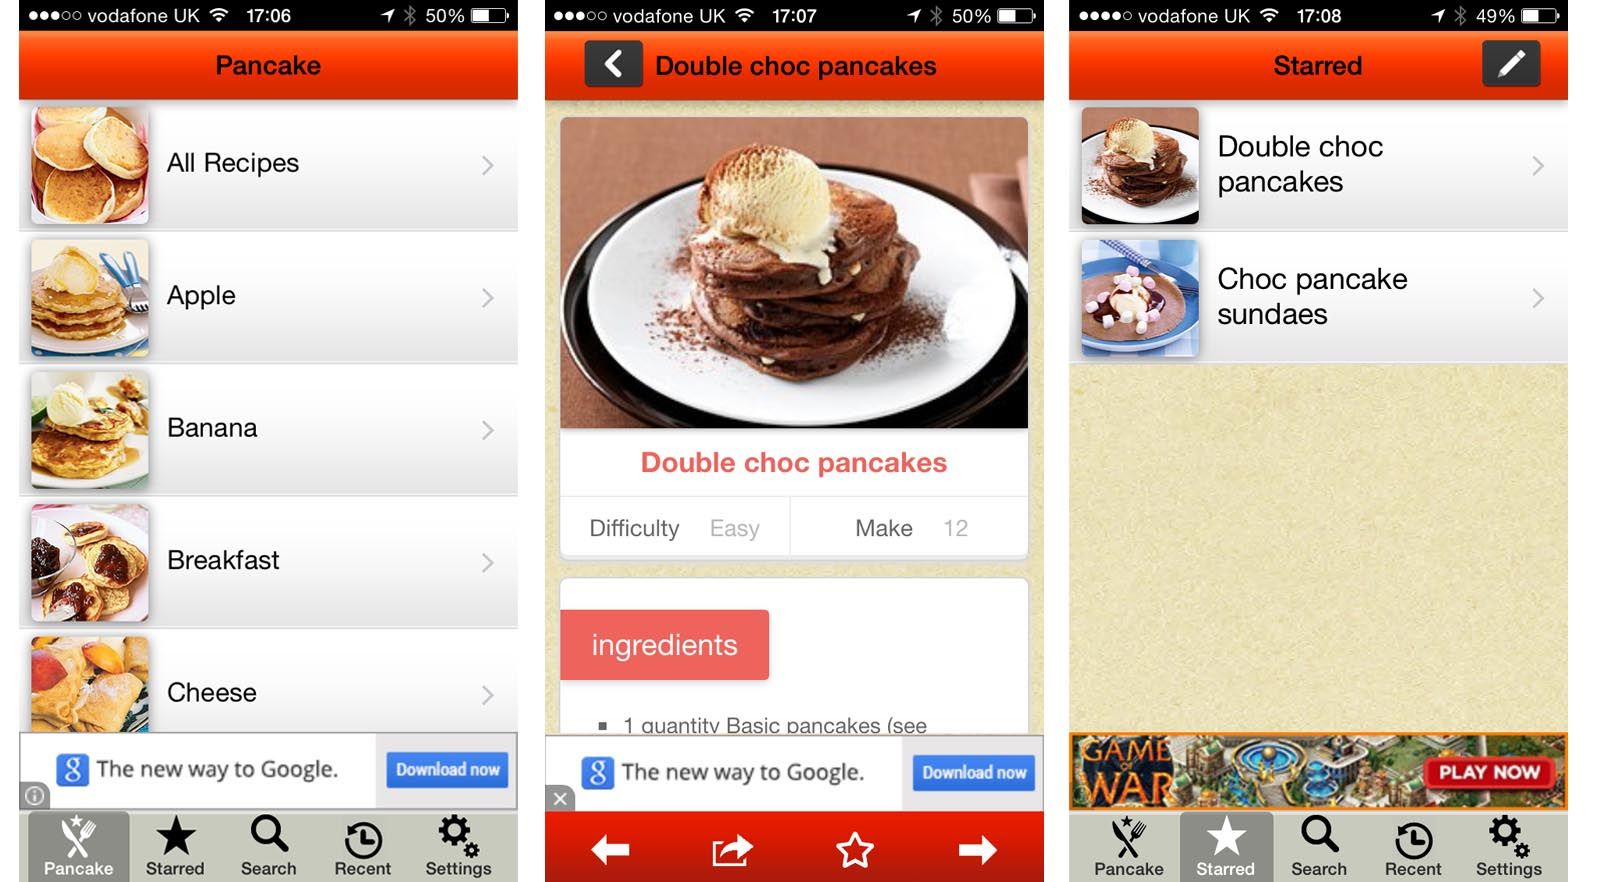 flipping pancakes and crack addictions 5 great apps for lent image 2